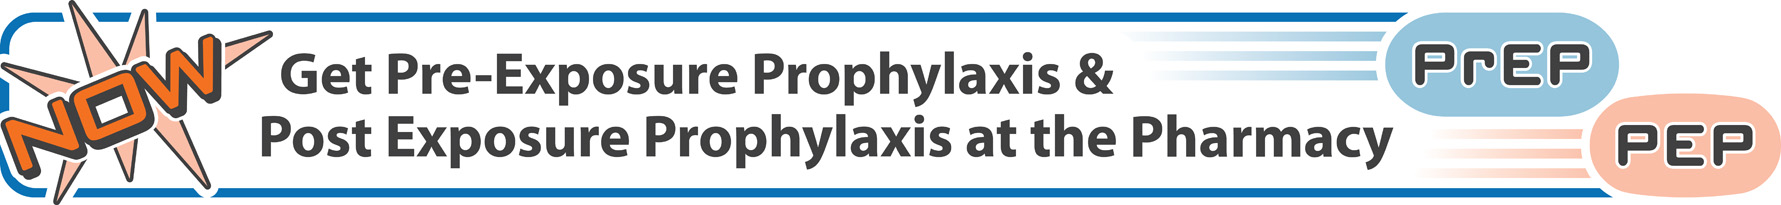 Now Get Pre-Exposure Prophylaxis and Post Exposure Prophylaxis at the Pharmacy